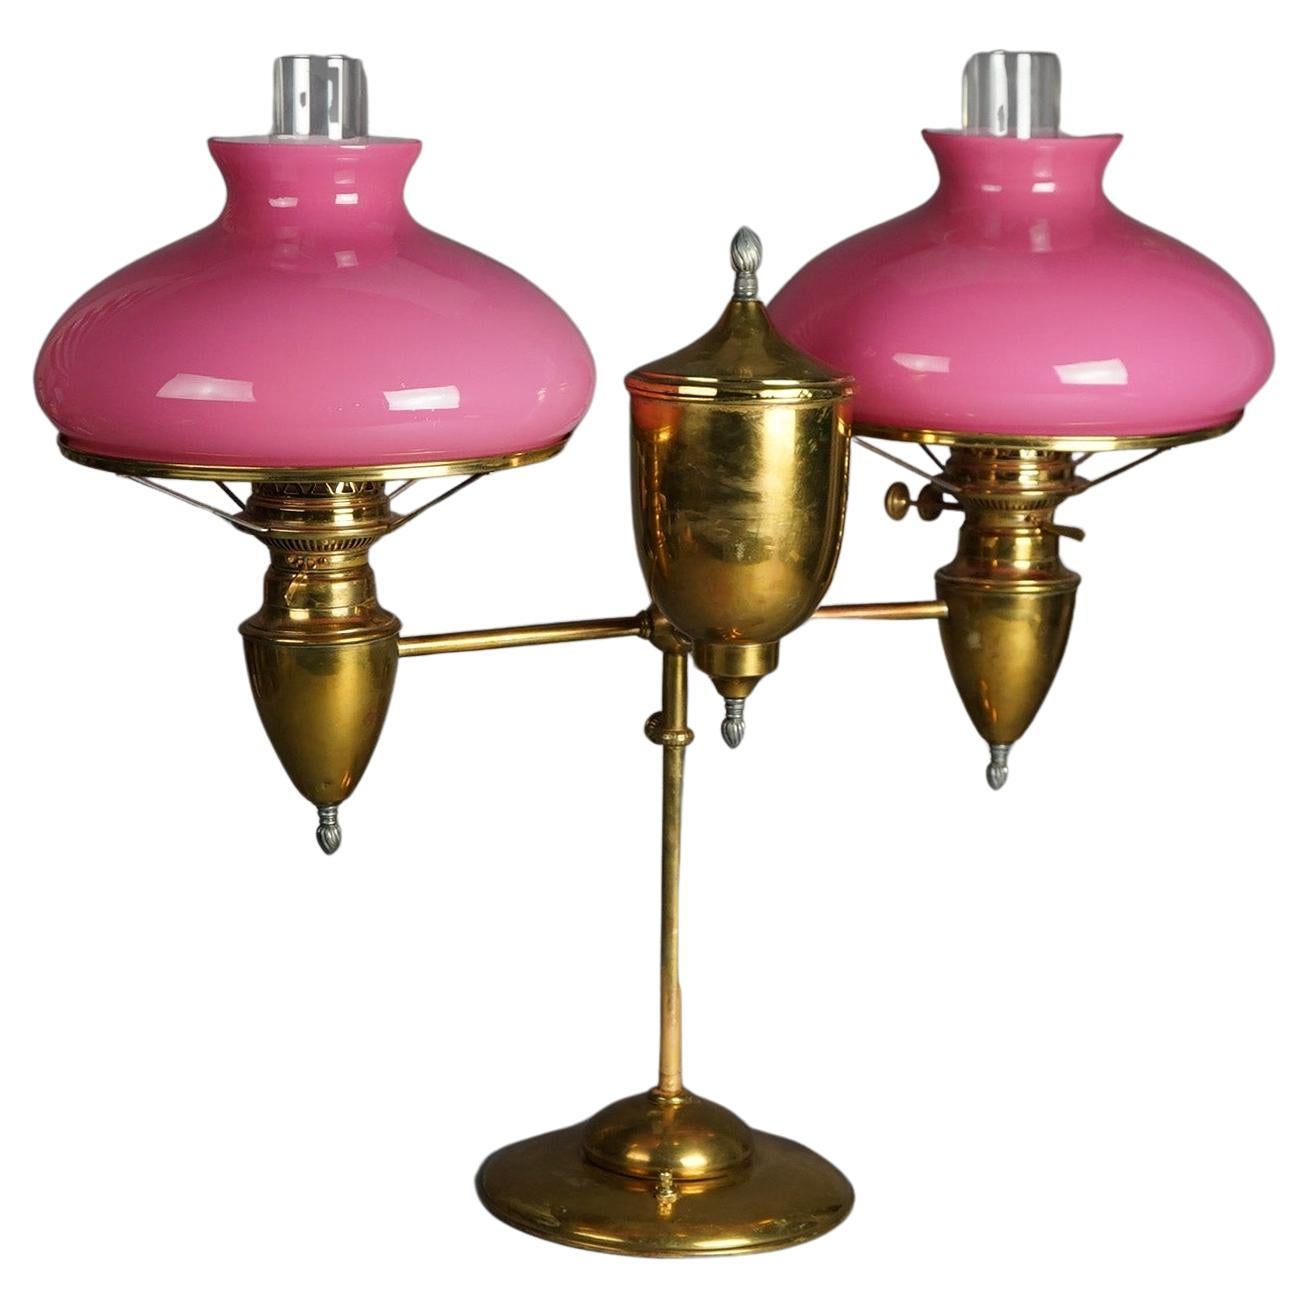 Antique Bradley & Hubbard Brass Double Student Lamp with Pink Shades c1880